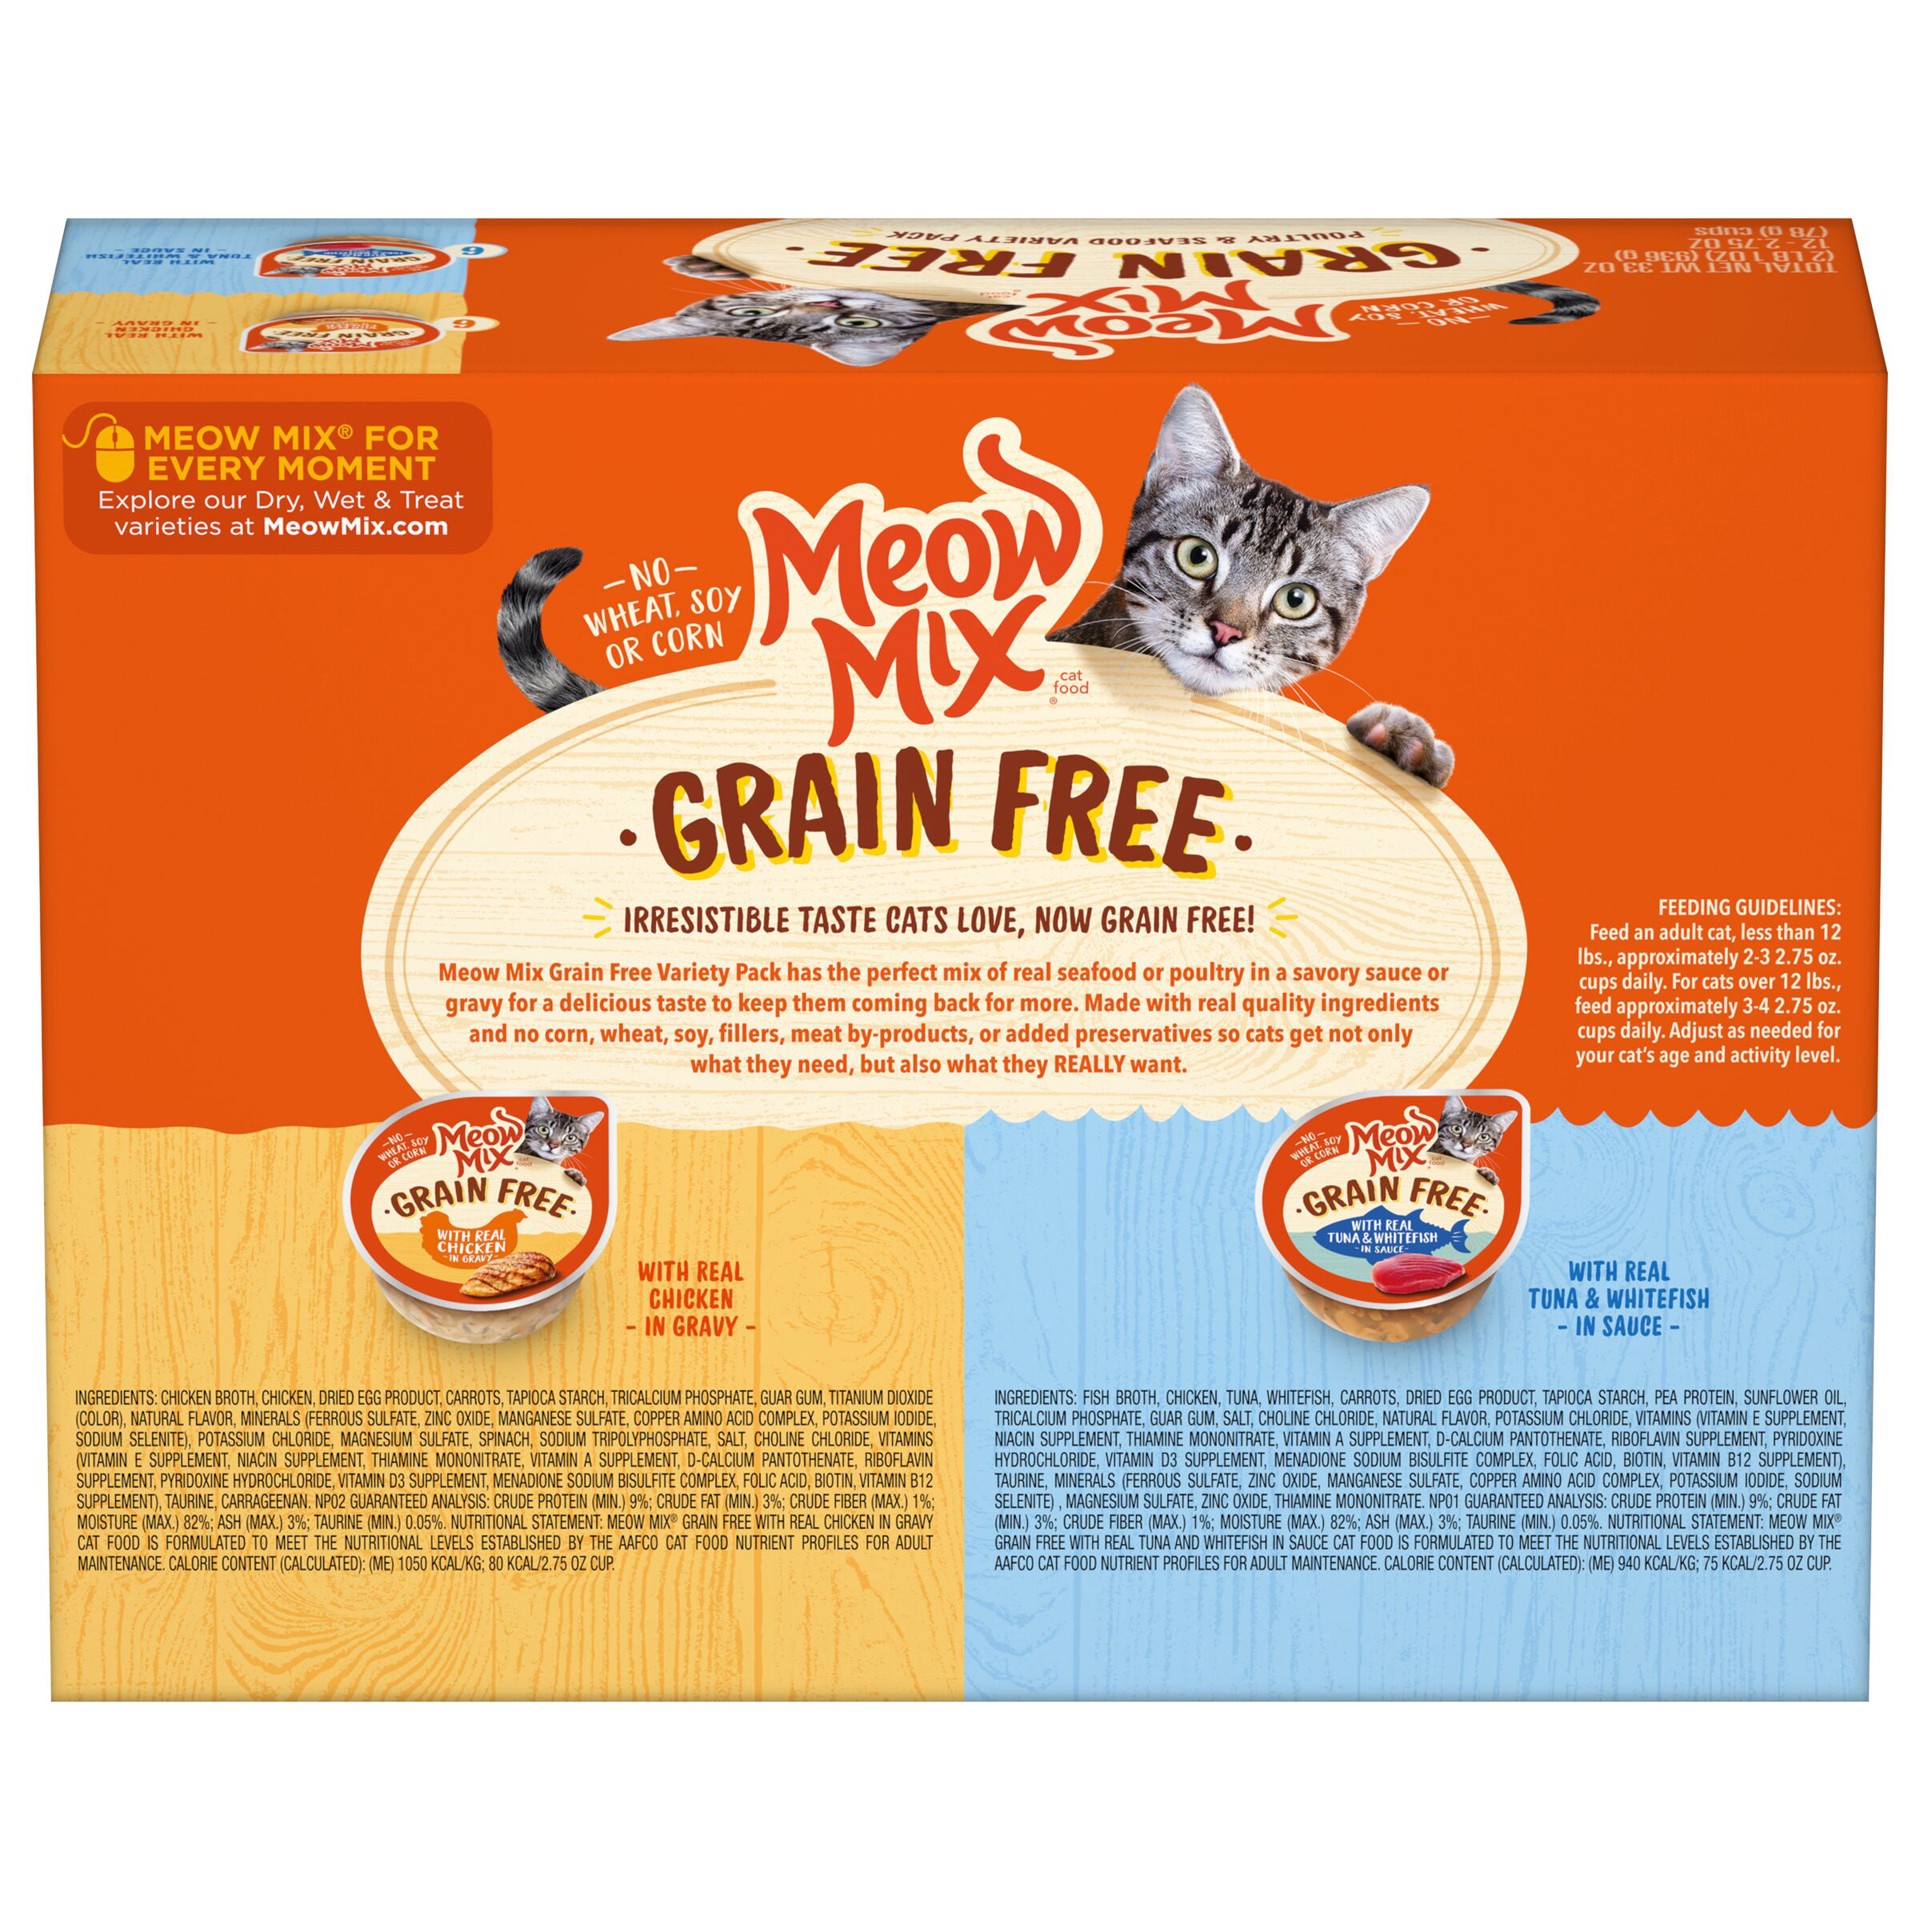 slide 2 of 7, Meow Mix Grain Free Poultry & Seafood Variety Pack with Real Chicken in Gravy, Real Tuna and Whitefish in Sauce, 2.57 oz, 33 oz